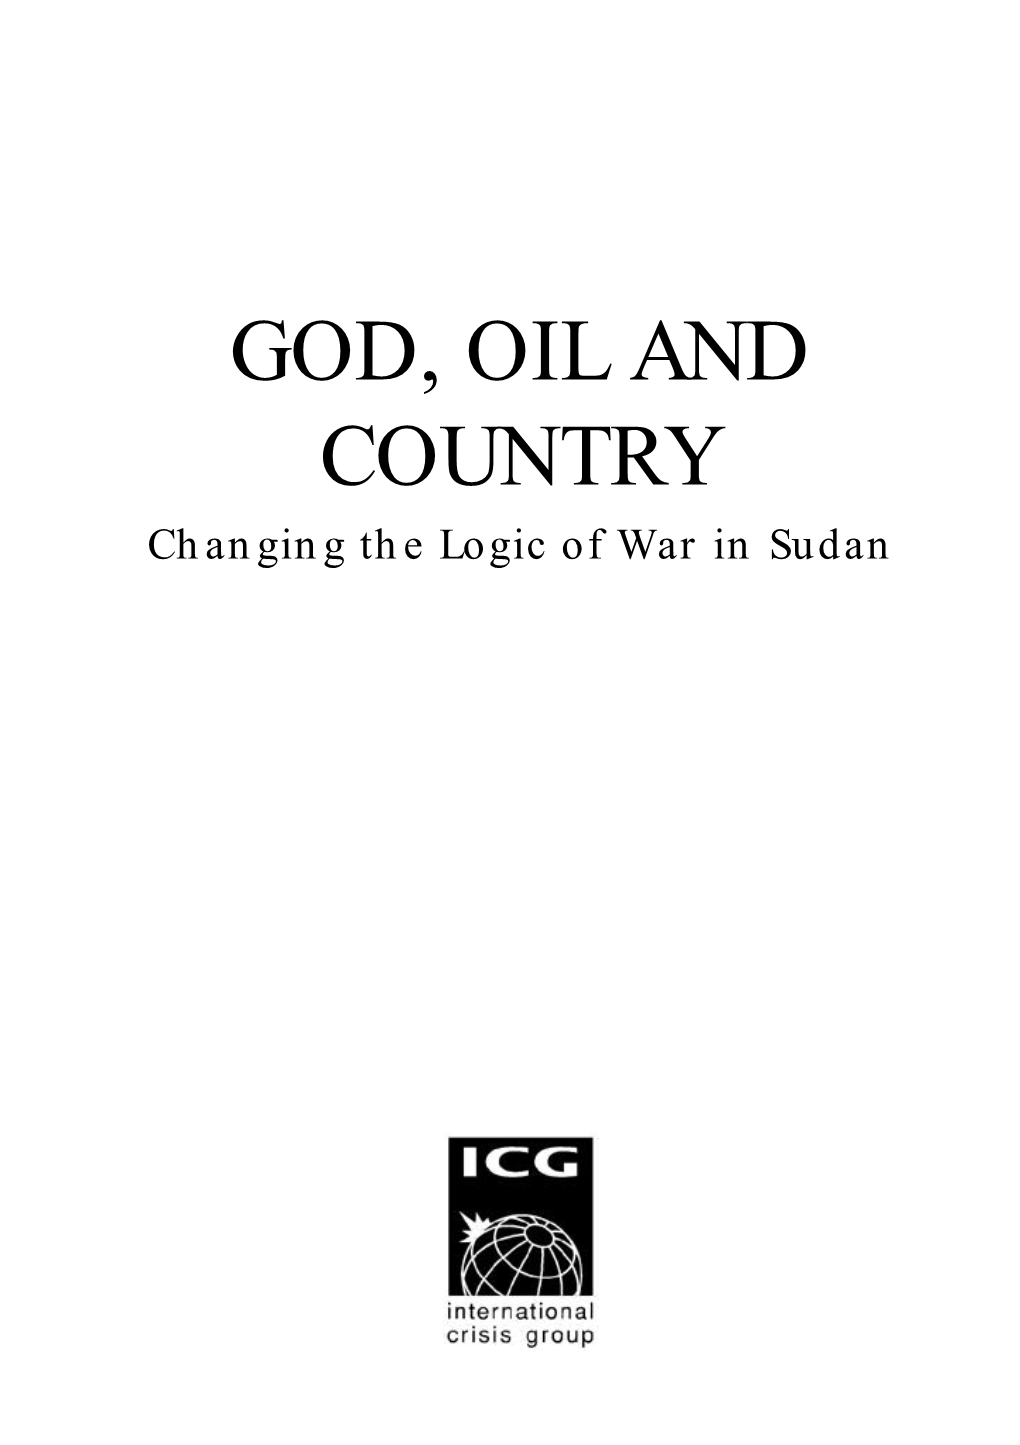 Changing the Logic of War in Sudan